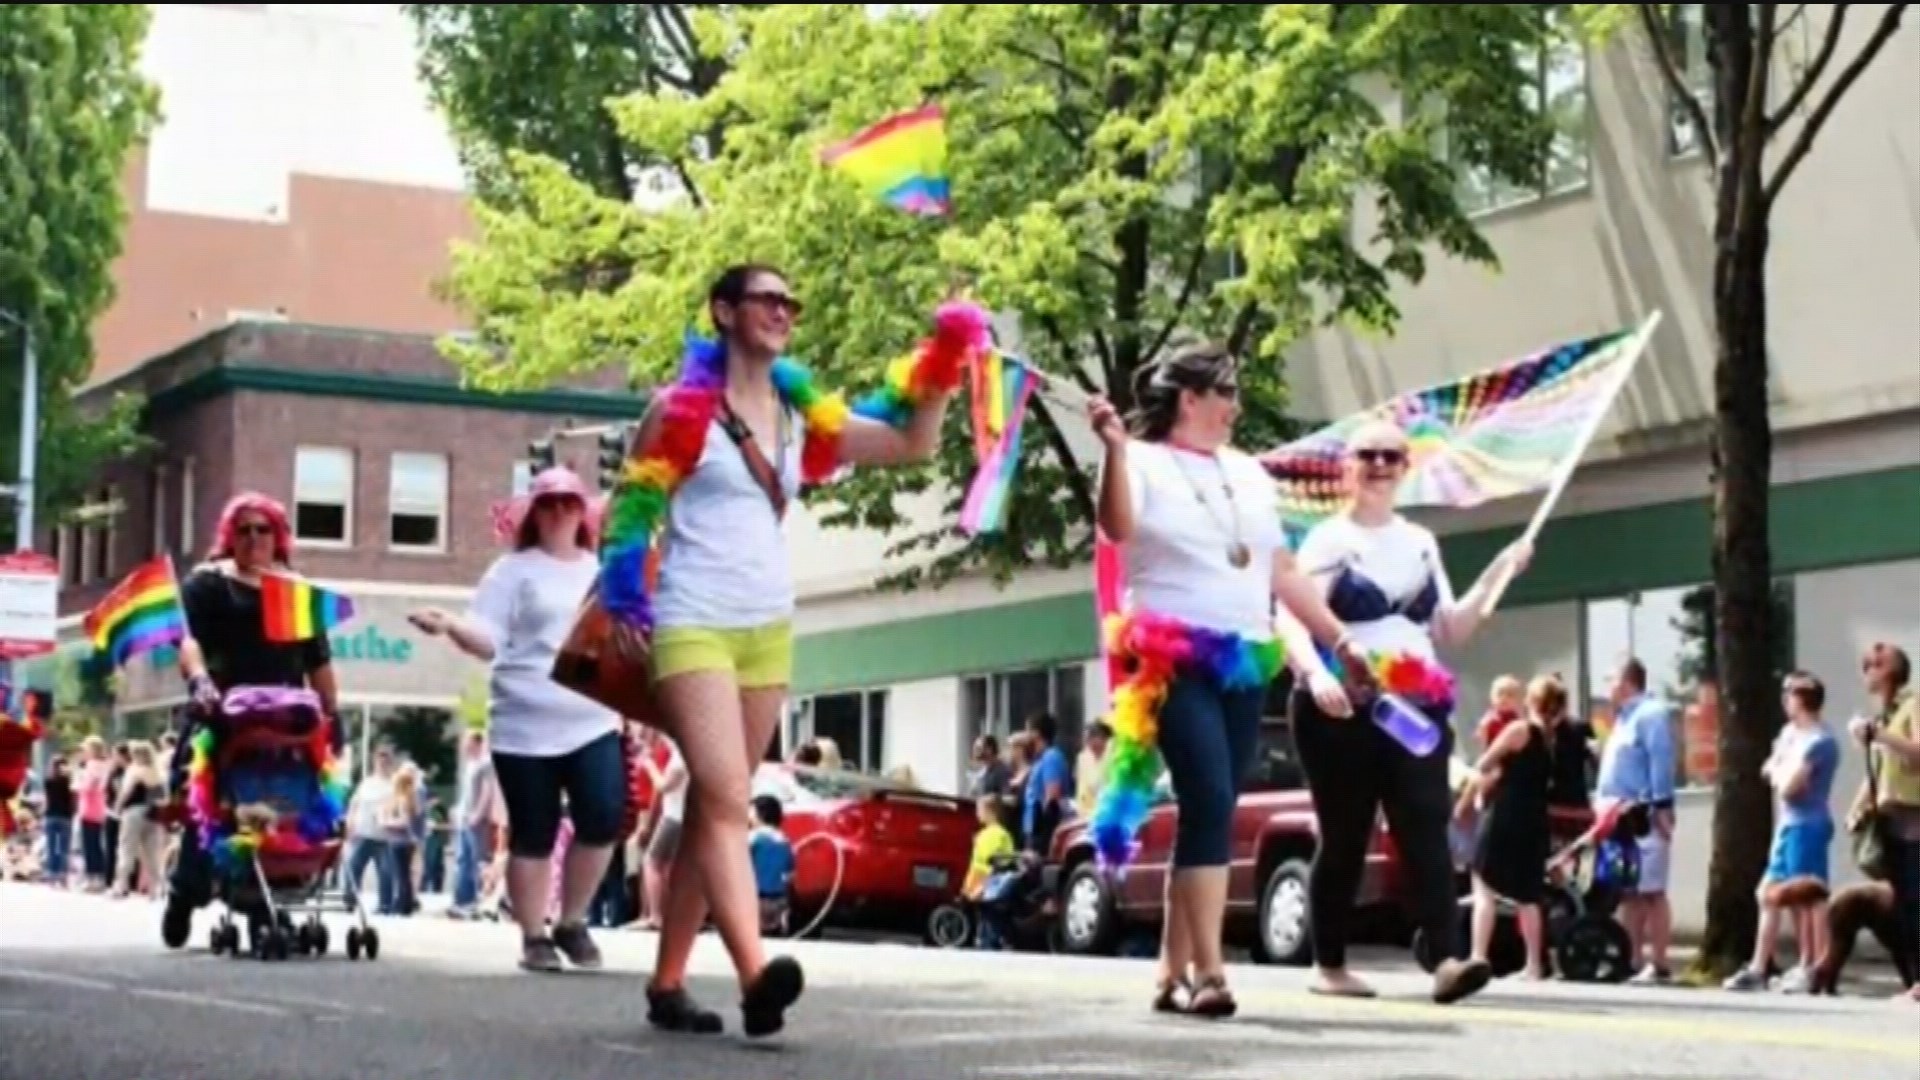 Olympia's Capital City Pride festival plans to honor Orlando victims